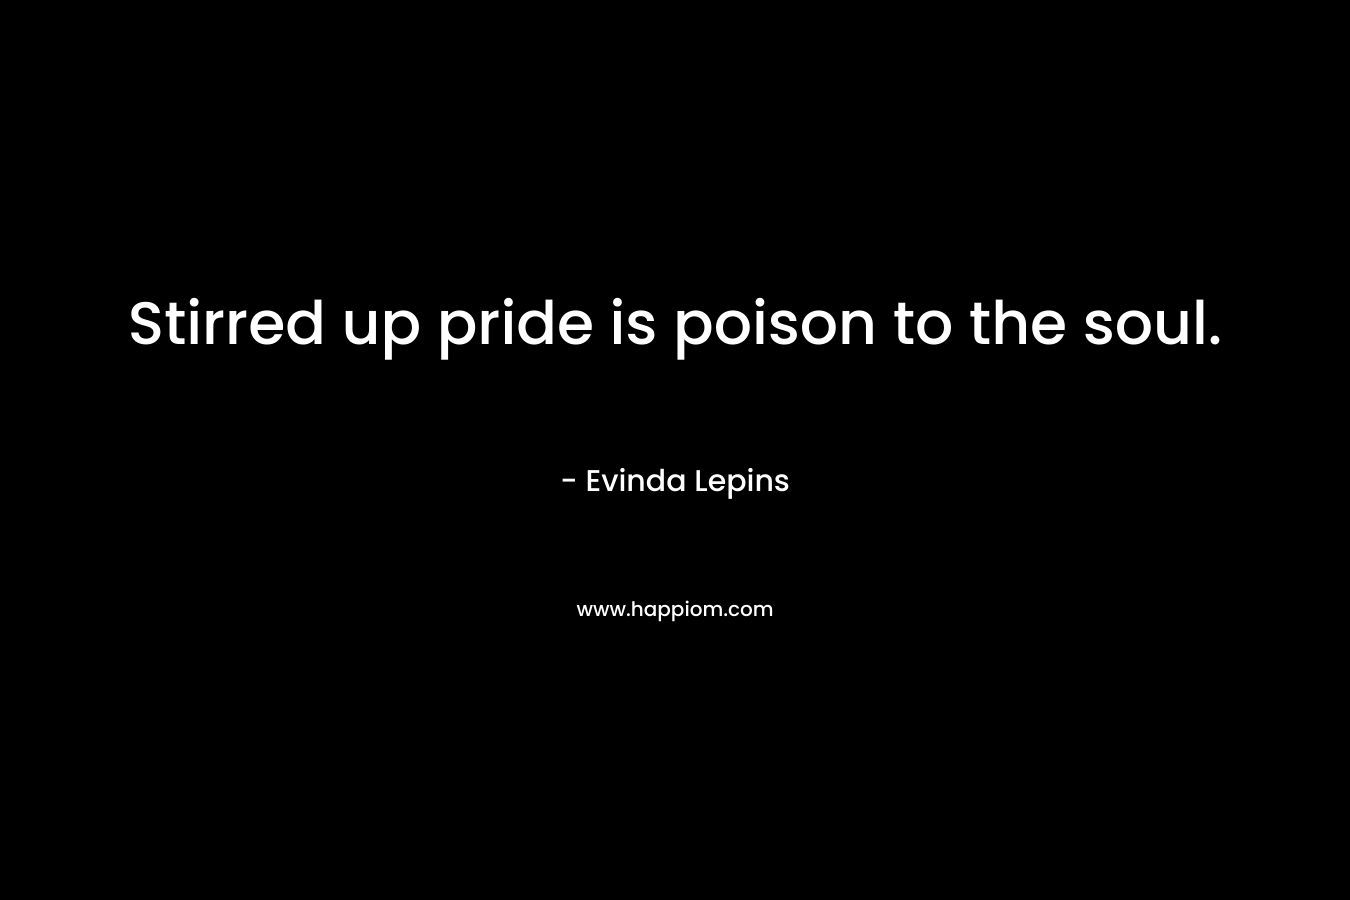 Stirred up pride is poison to the soul. – Evinda Lepins